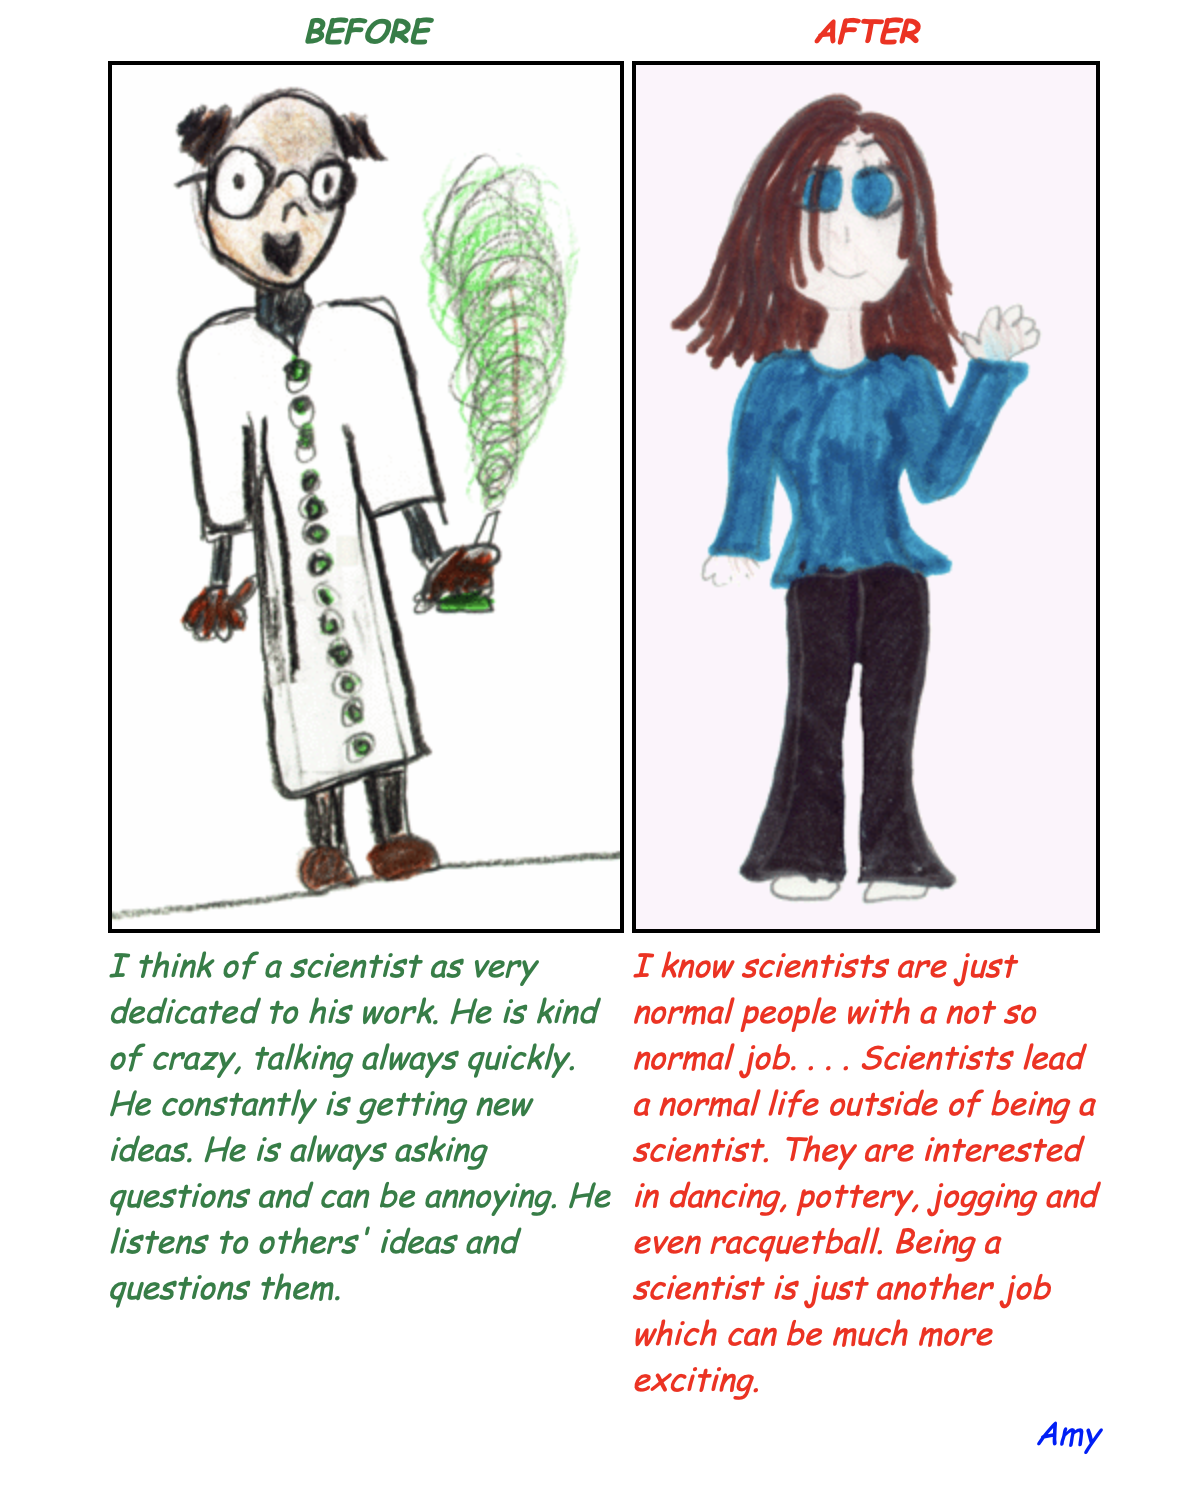 Left side (before visit to FermiLab): drawing of male scientist in lab coat holding beaker of chemical reaction. Text: "I think of a scientist as very dedicated to his work. He is kind of crazy, talking always quickly. He constantly is getting new ideas. He is always asking questions and can be annoying. He listens to others' ideas and questions them." On the right (after visit to FermiLab): drawing of woman waving. Text: "I know scientists are just normal people with a not so normal job. . . . Scientists lead a normal life outside of being a scientist. They are interested in dancing, pottery, jogging and even racquetball. Being a scientist is just another job which can be much more exciting."